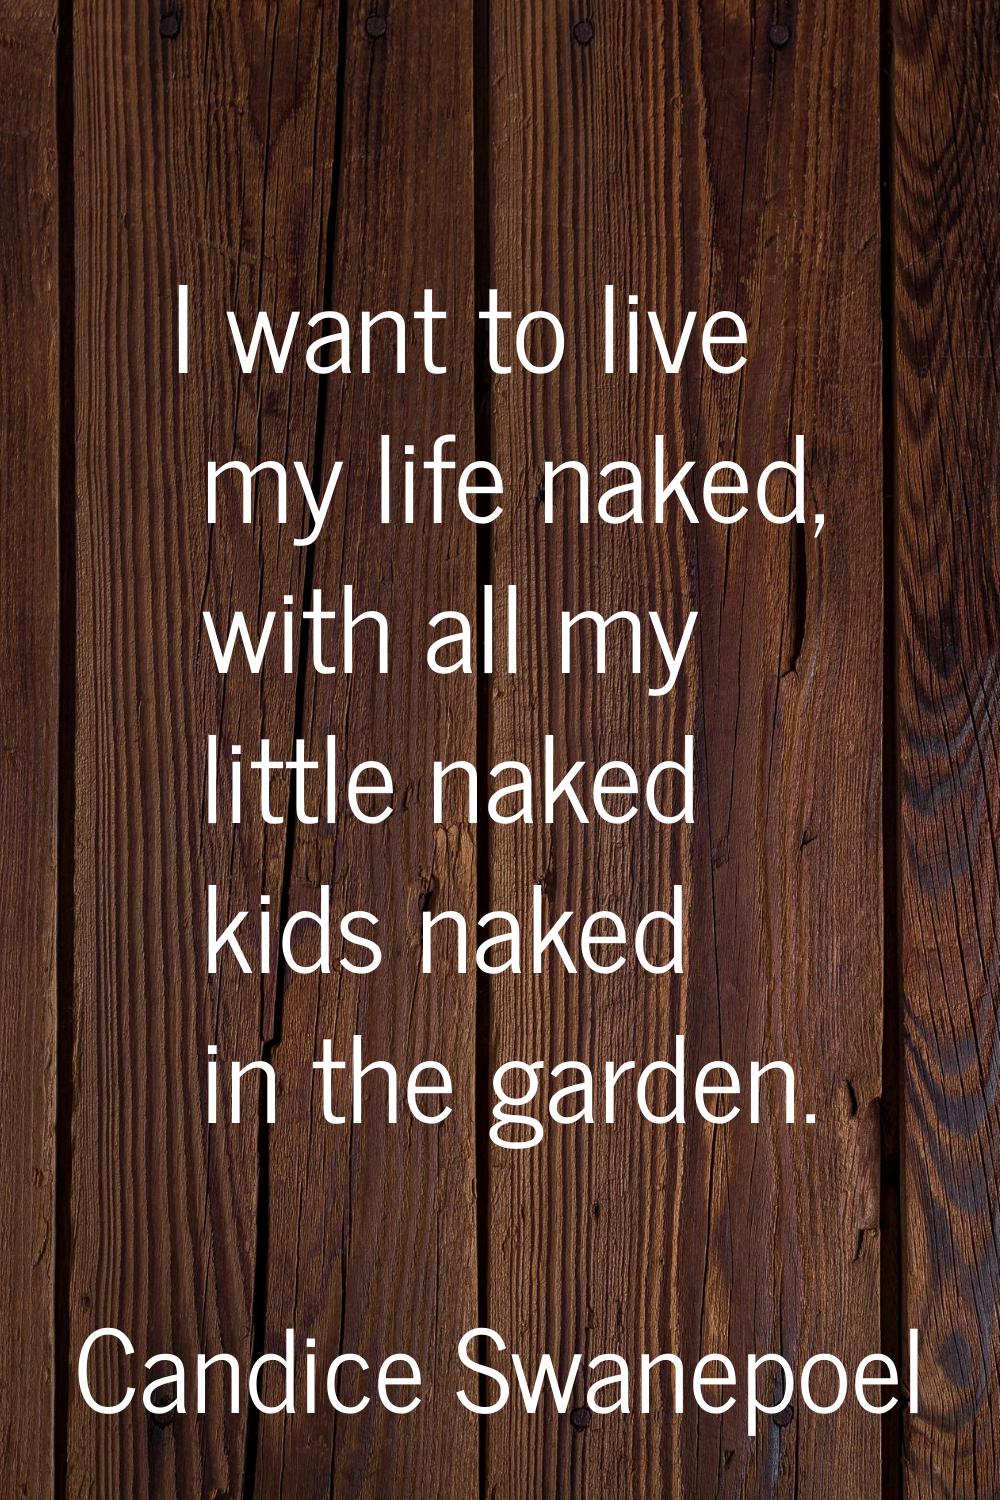 I want to live my life naked, with all my little naked kids naked in the garden.